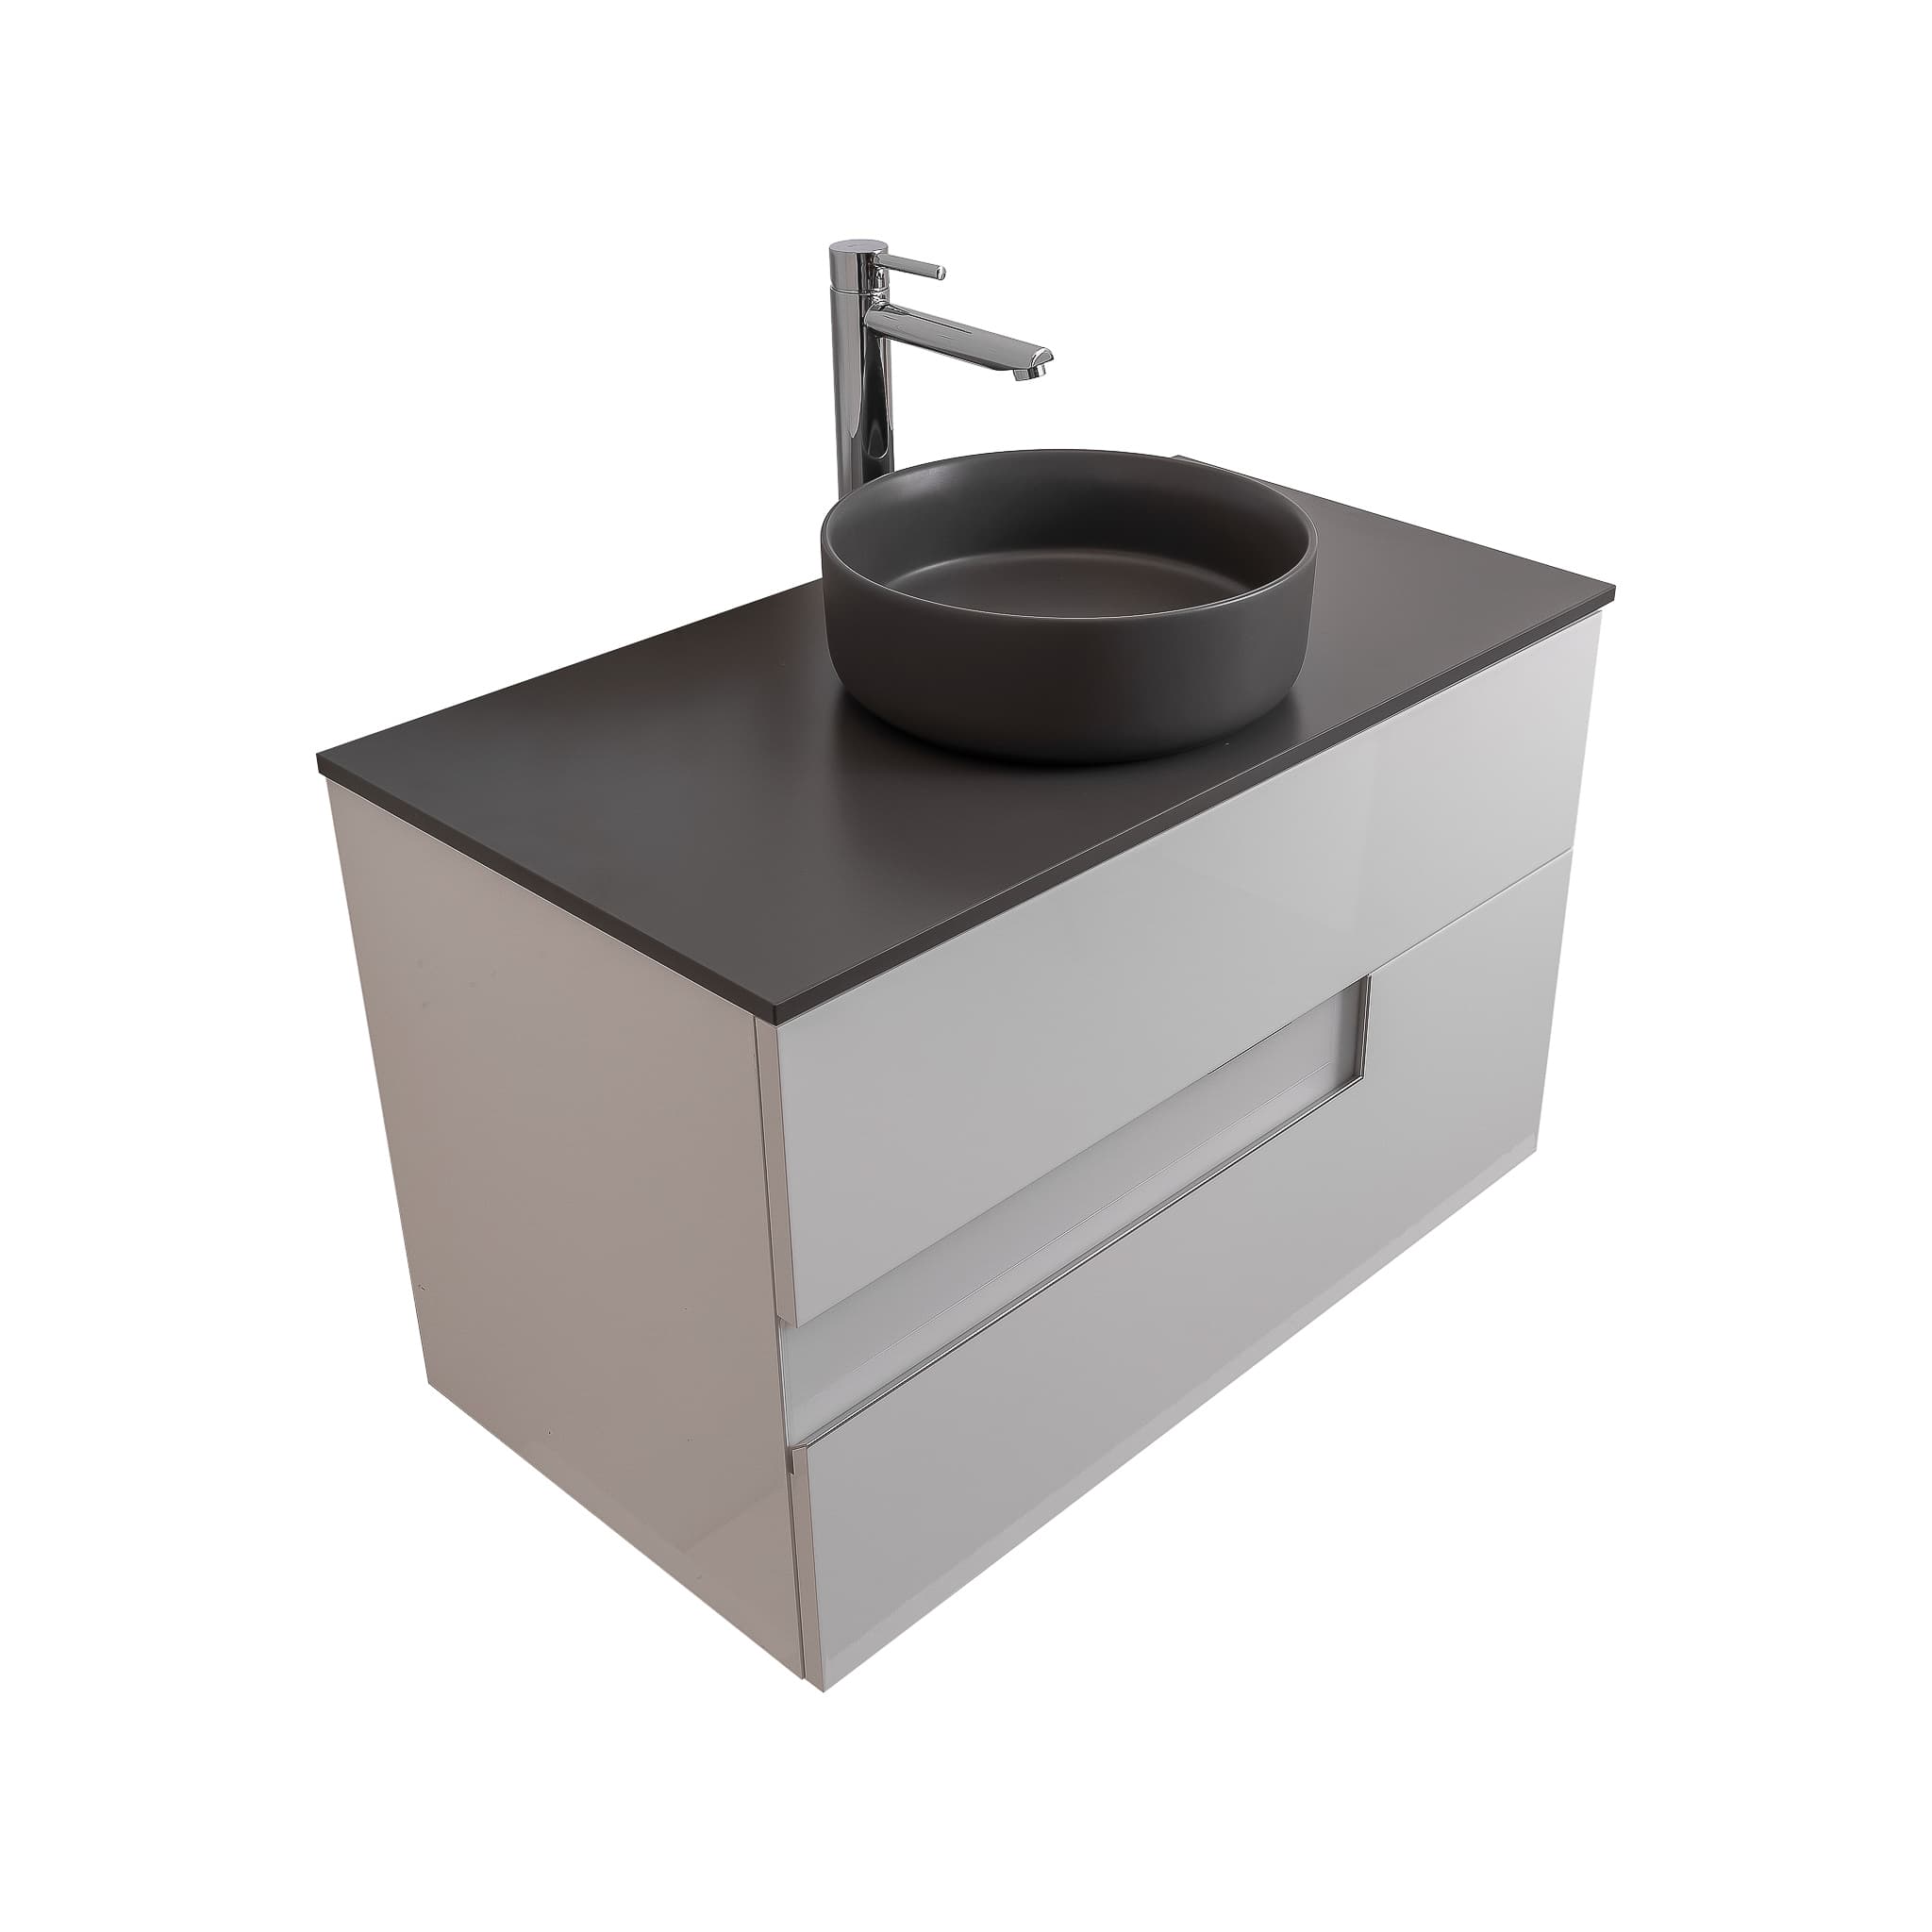 Vision 31.5 White High Gloss Cabinet, Ares Grey Ceniza Top And Ares Grey Ceniza Ceramic Basin, Wall Mounted Modern Vanity Set